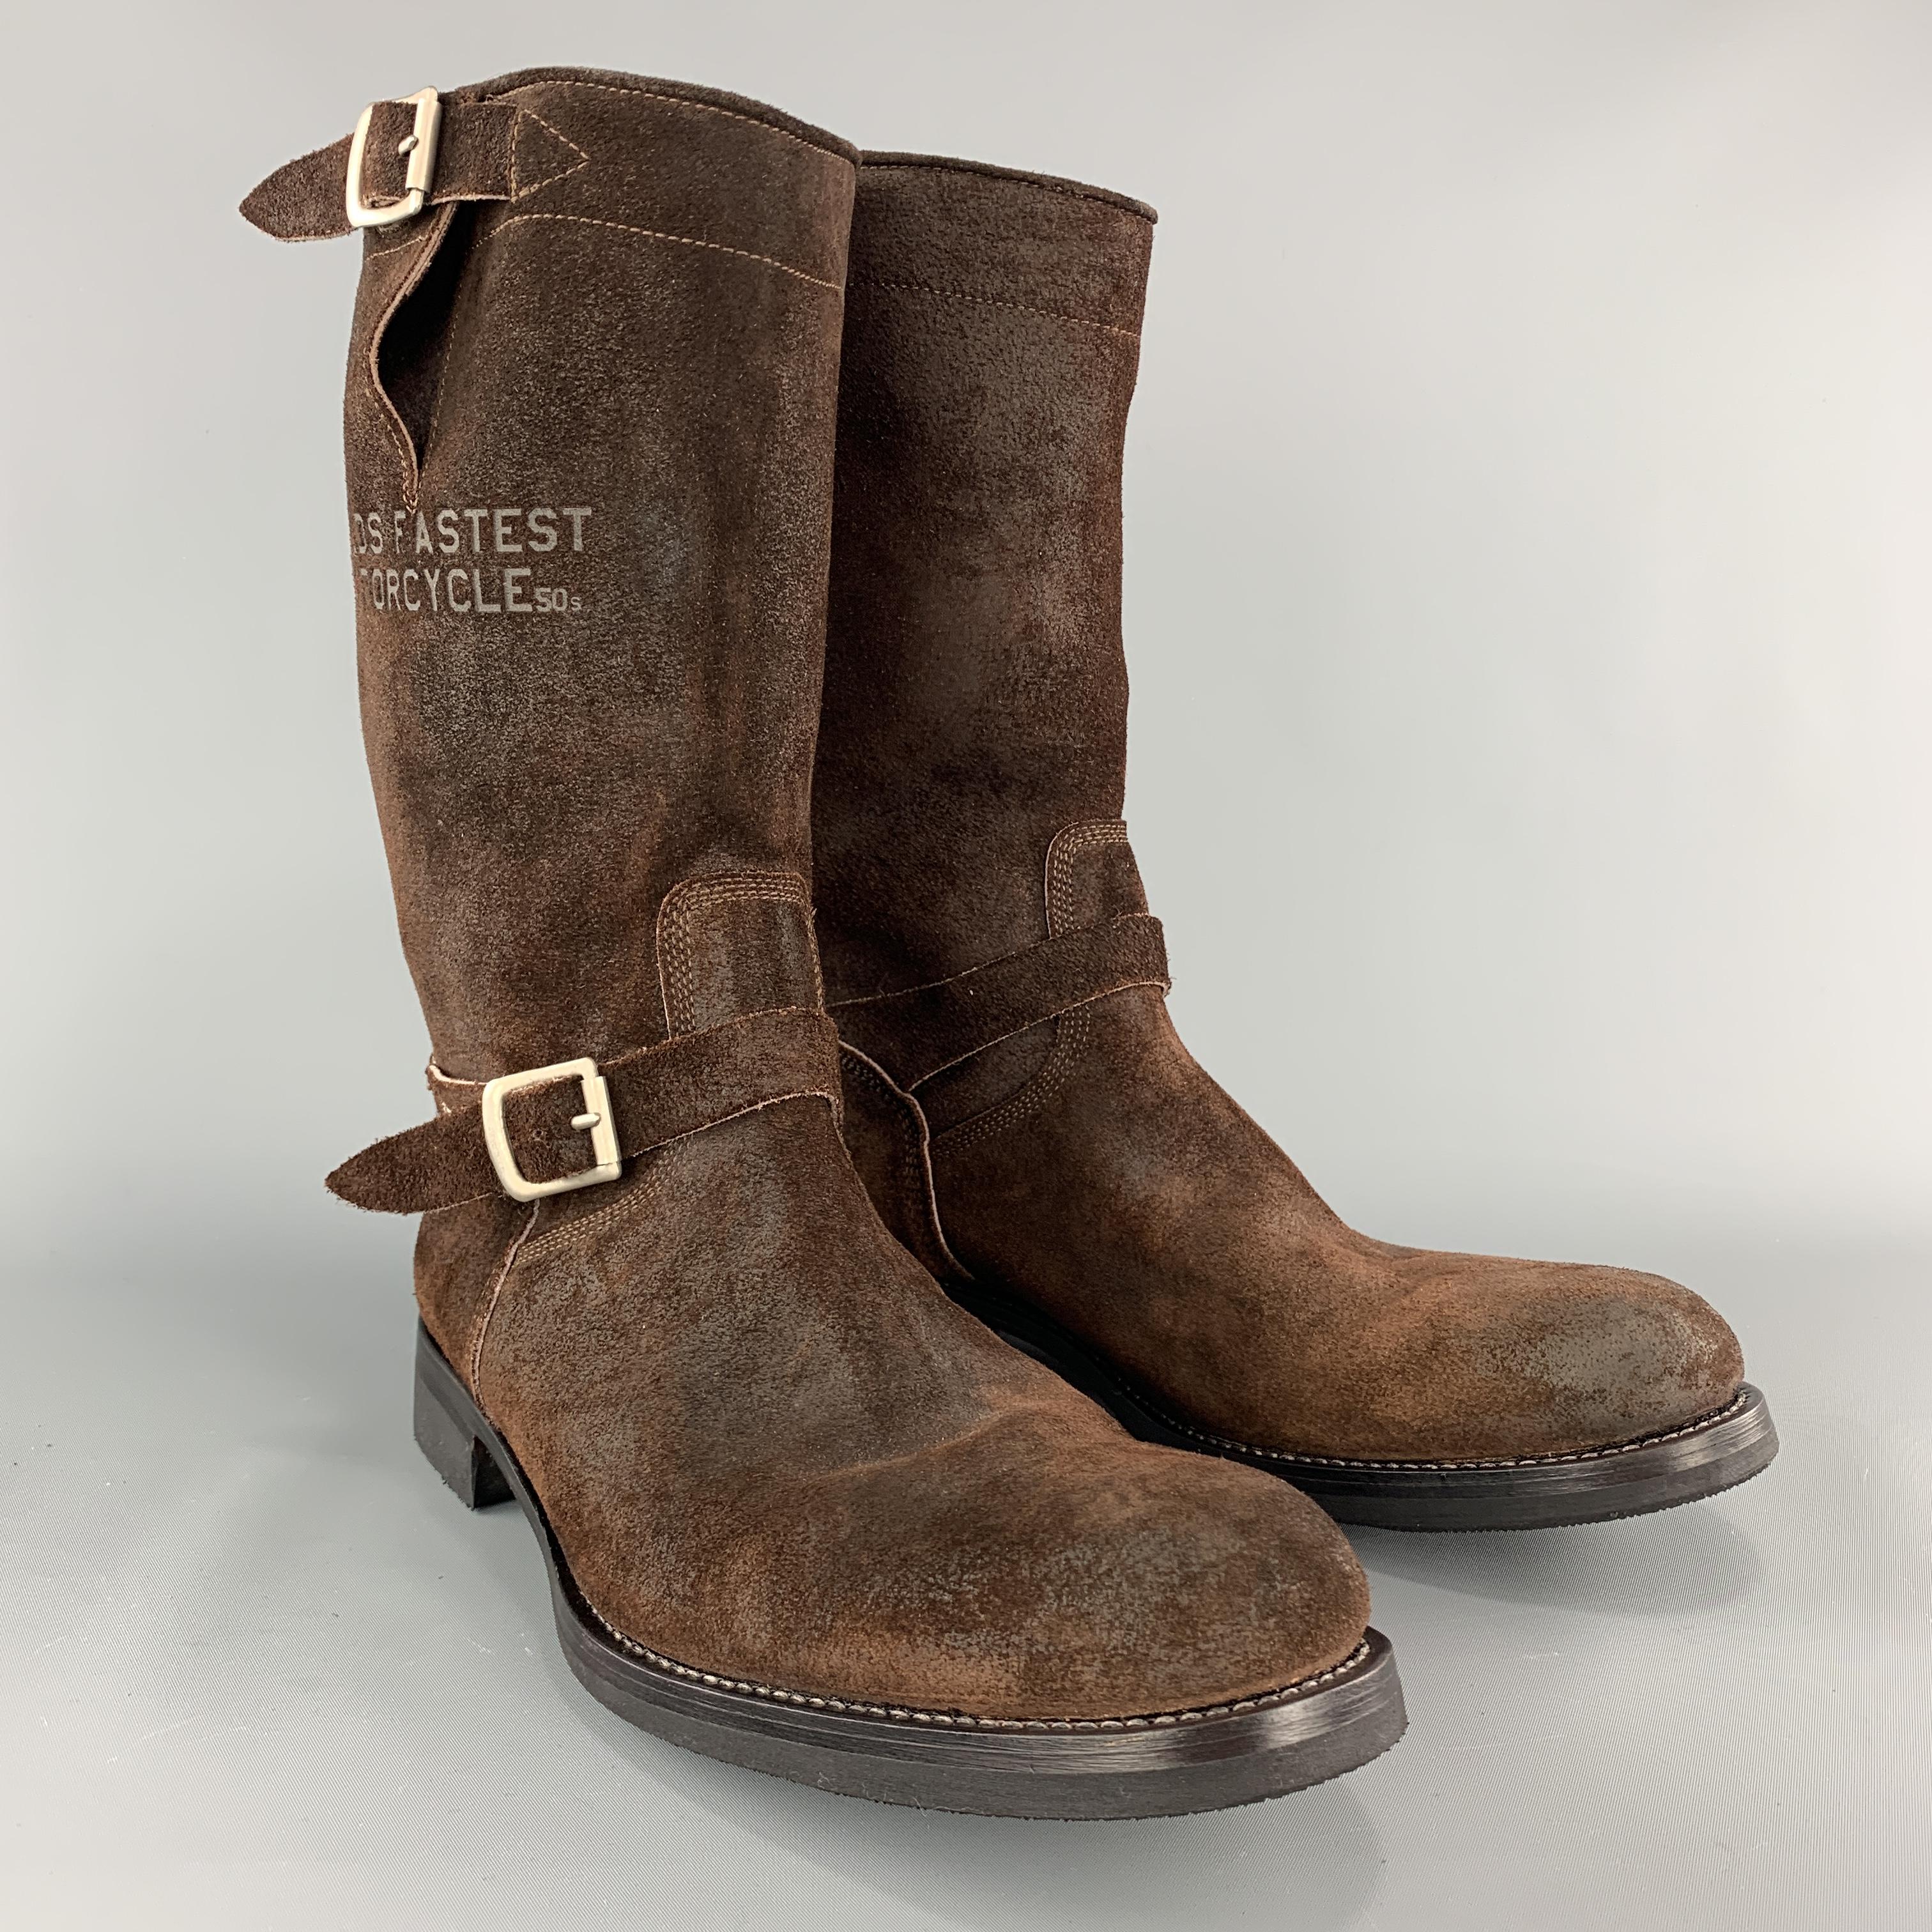 TRIUMPH X PAUL SMITH biker style boots come in distressed brown suede with embossing, ankle stripe and rubber sole. Made in Italy.

New with Box. Pre-Owned Condition.
Marked: UK 9.5

Outsole: 12.5 x 4.5 in.
Length: 12 in.